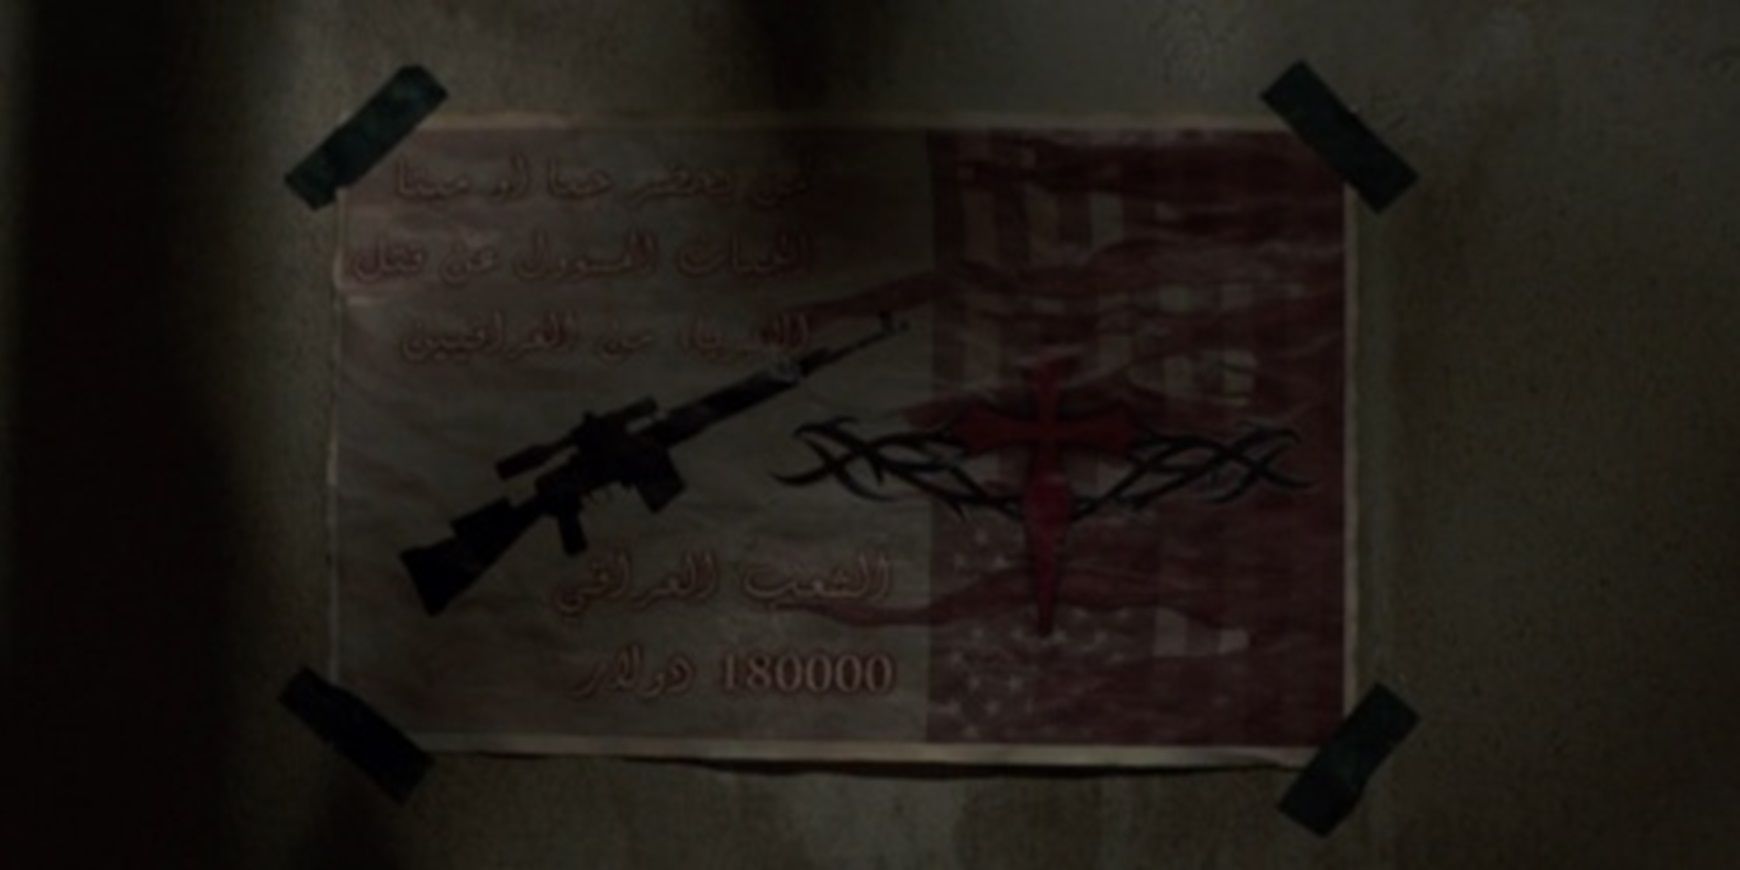 A wanted poster in American Sniper